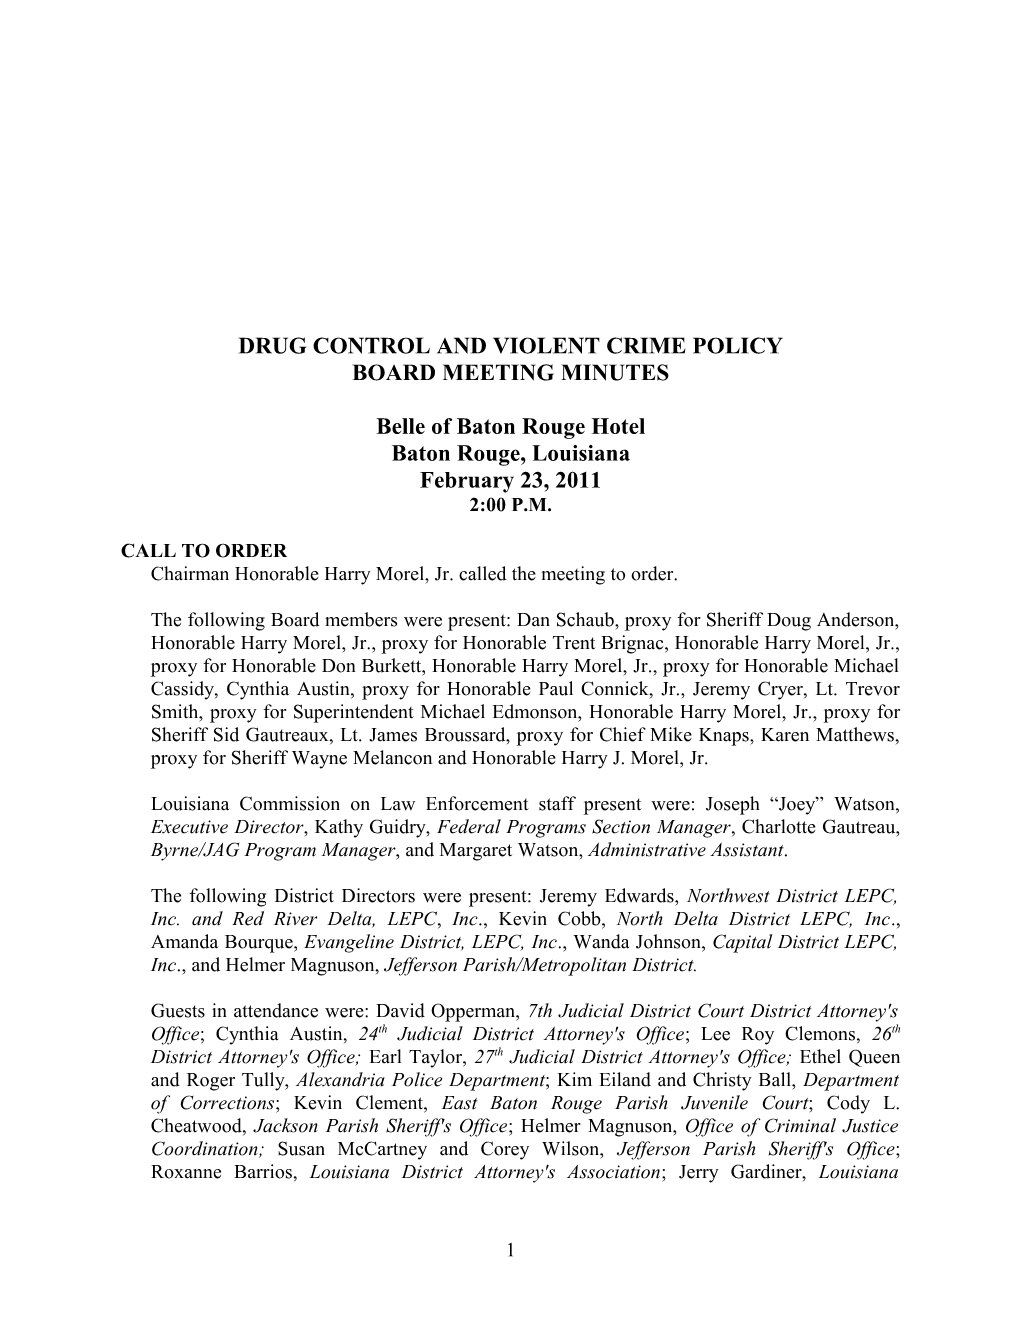 Minutes of Violent Crime and Drug Control Policy Board Meeting